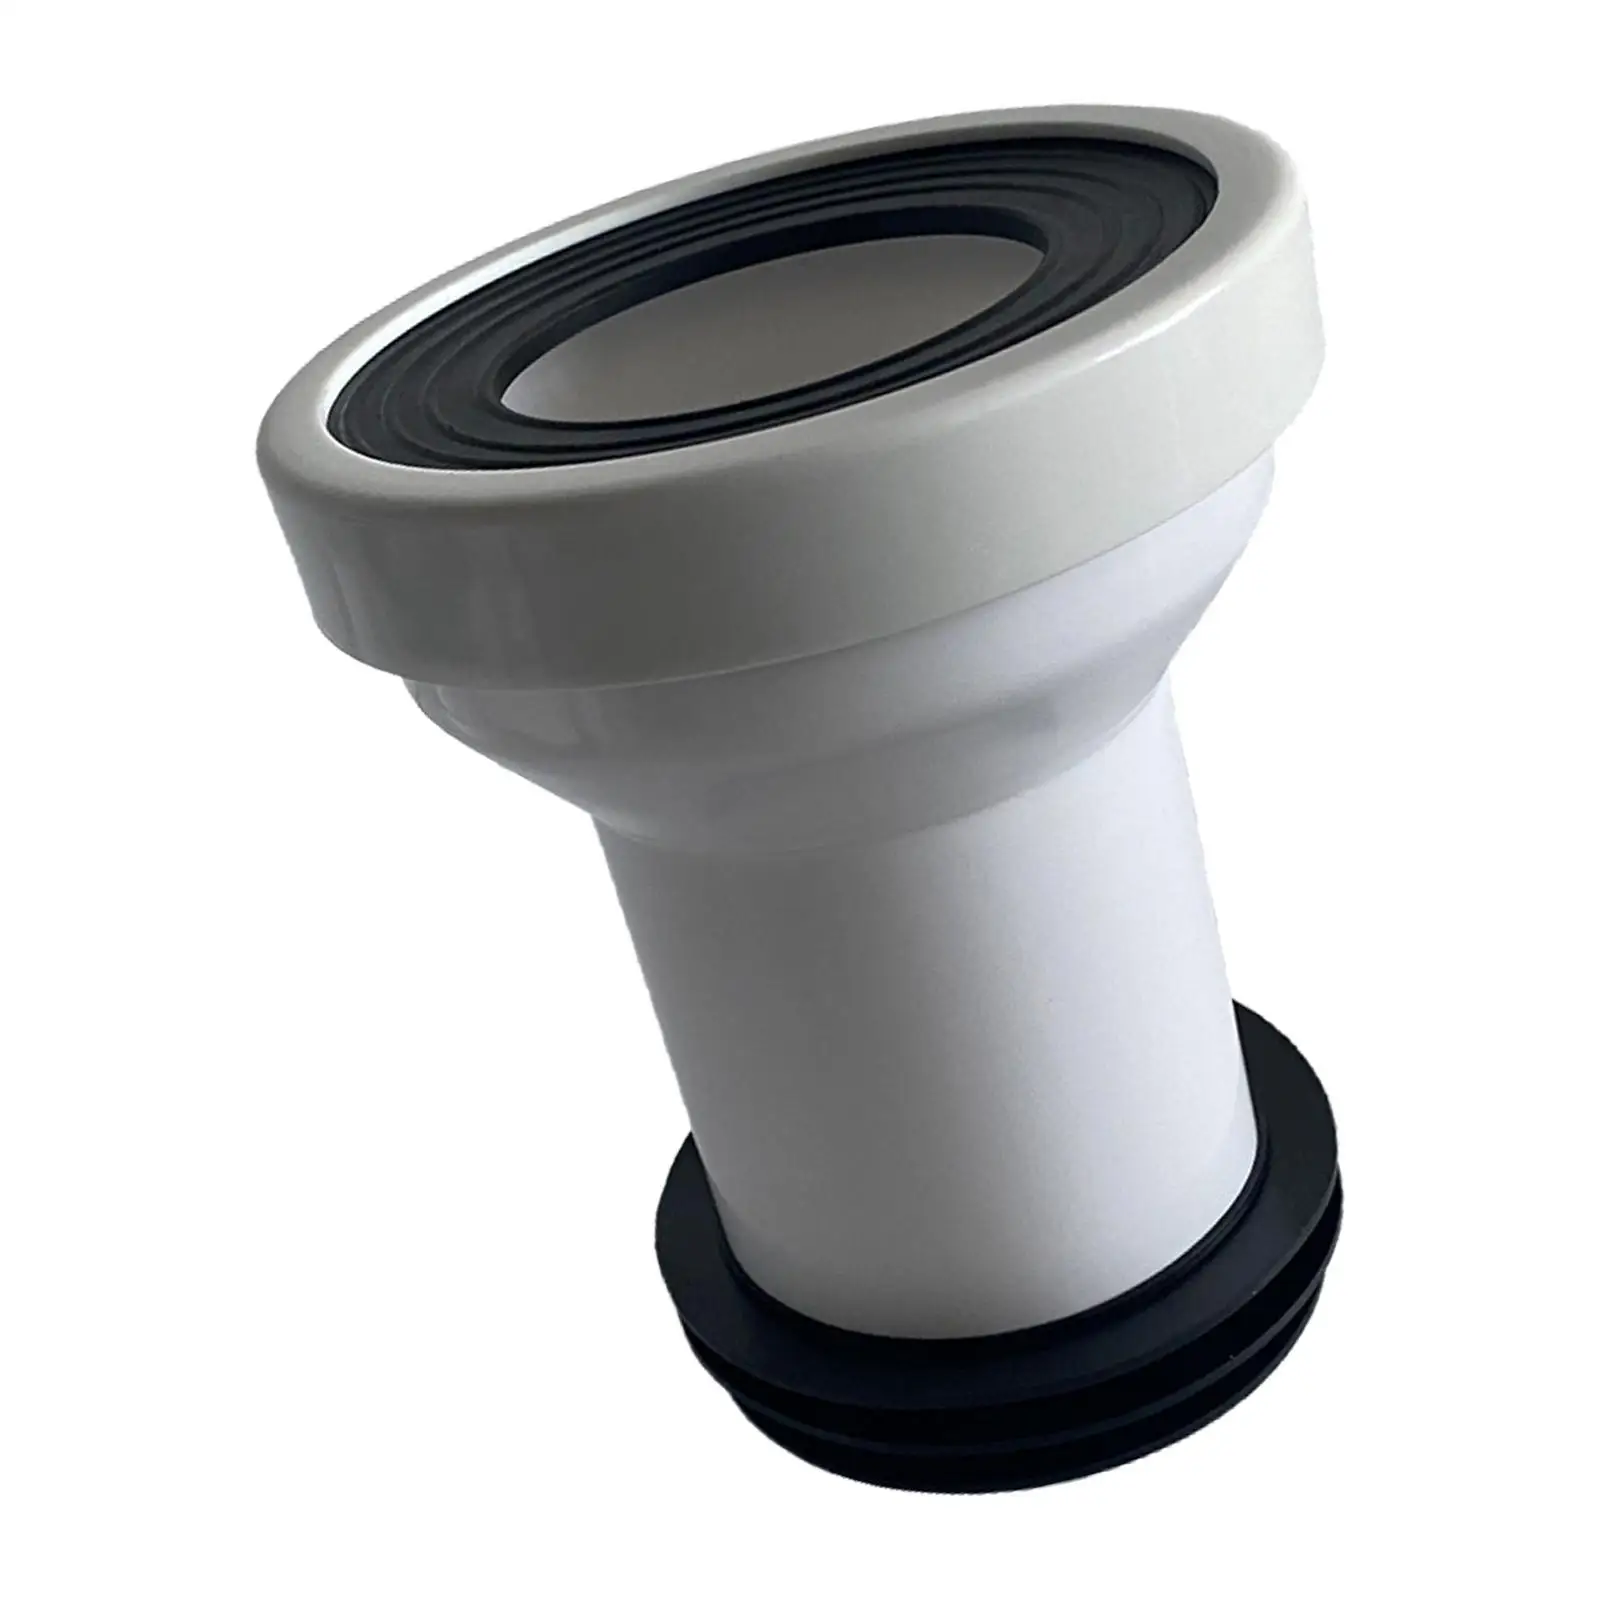 Full Flush Offset Toilet Flange Connector Replacement PVC Toilet Flange Shifter for Plumbing Drainage Systems Repairing Urinals